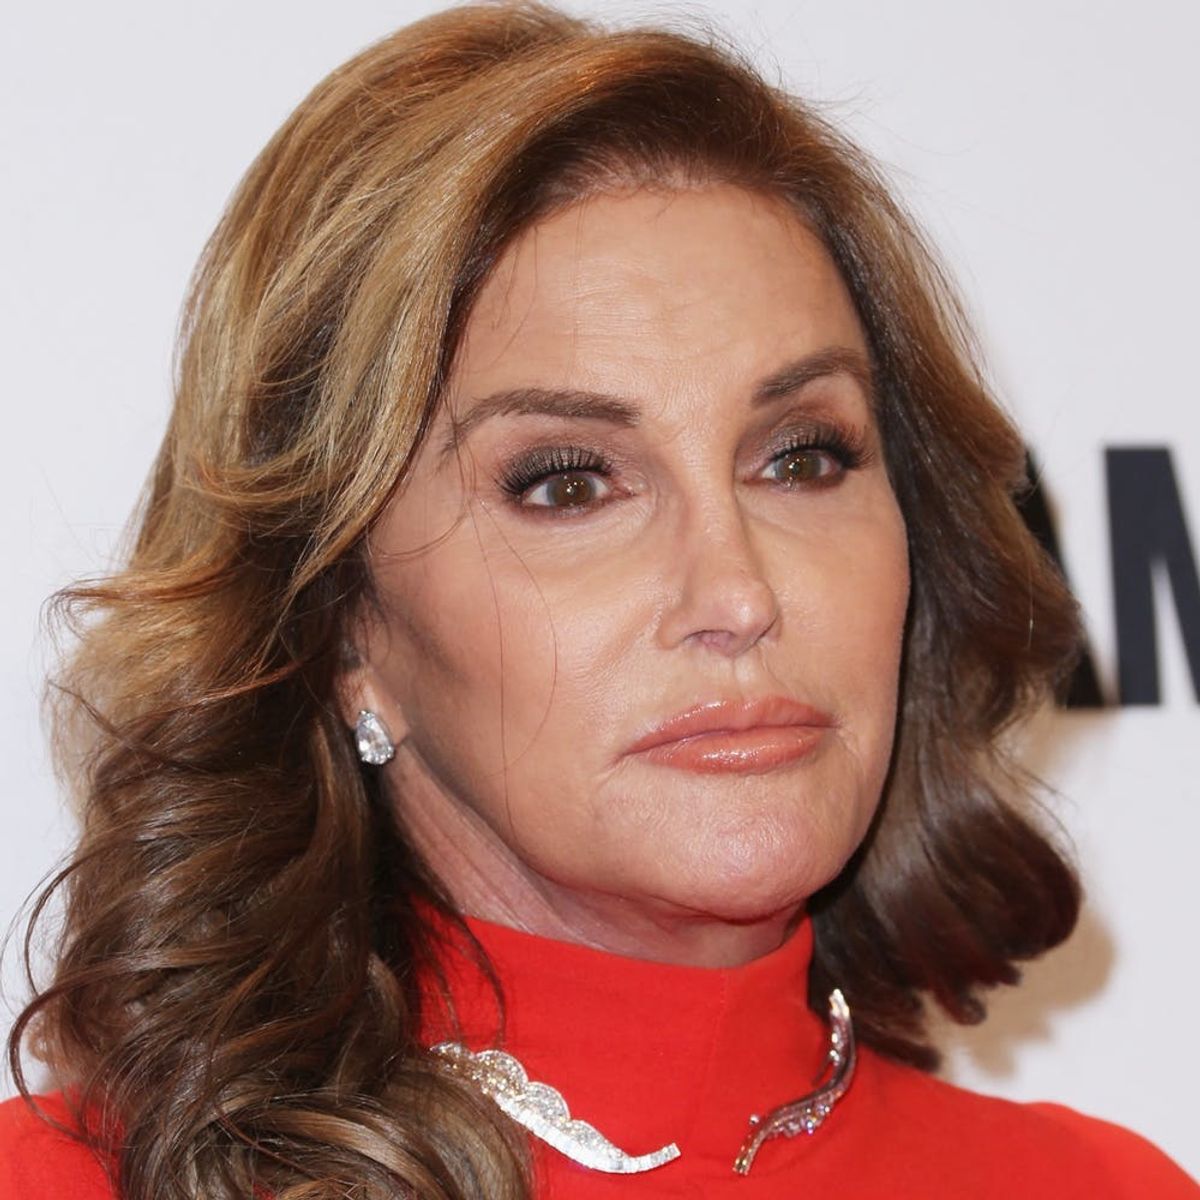 Donald Trump May Have Just Lost His Biggest LGBTQ Supporter in Caitlyn Jenner